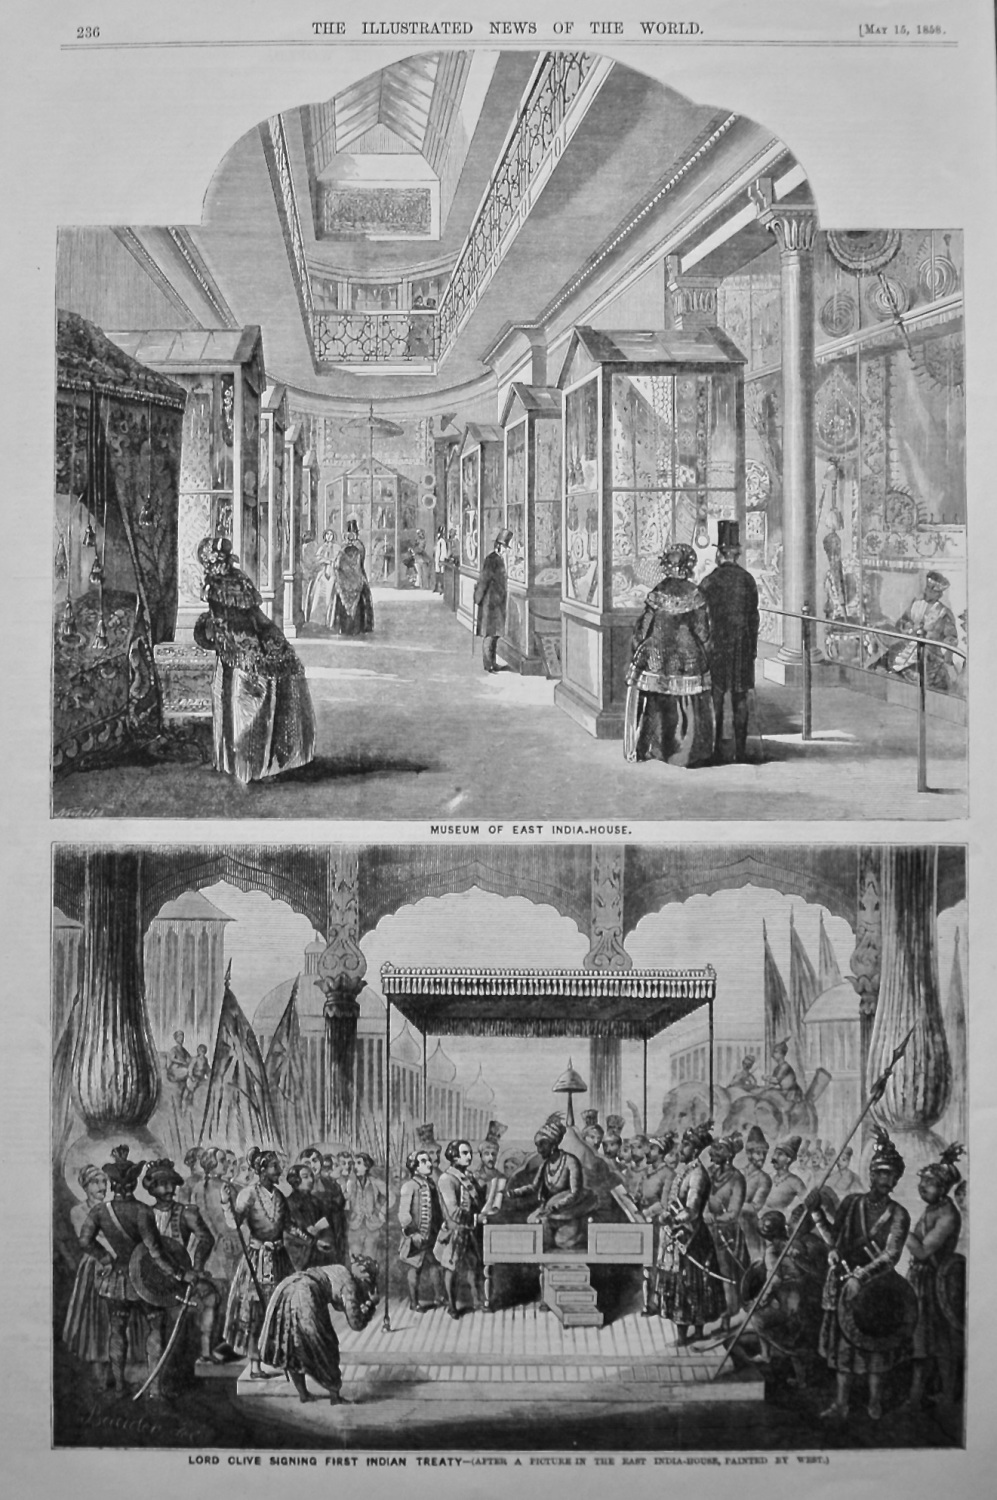 Museum of East India_House.  & Lord Clive Signing First Indian Treaty.  185